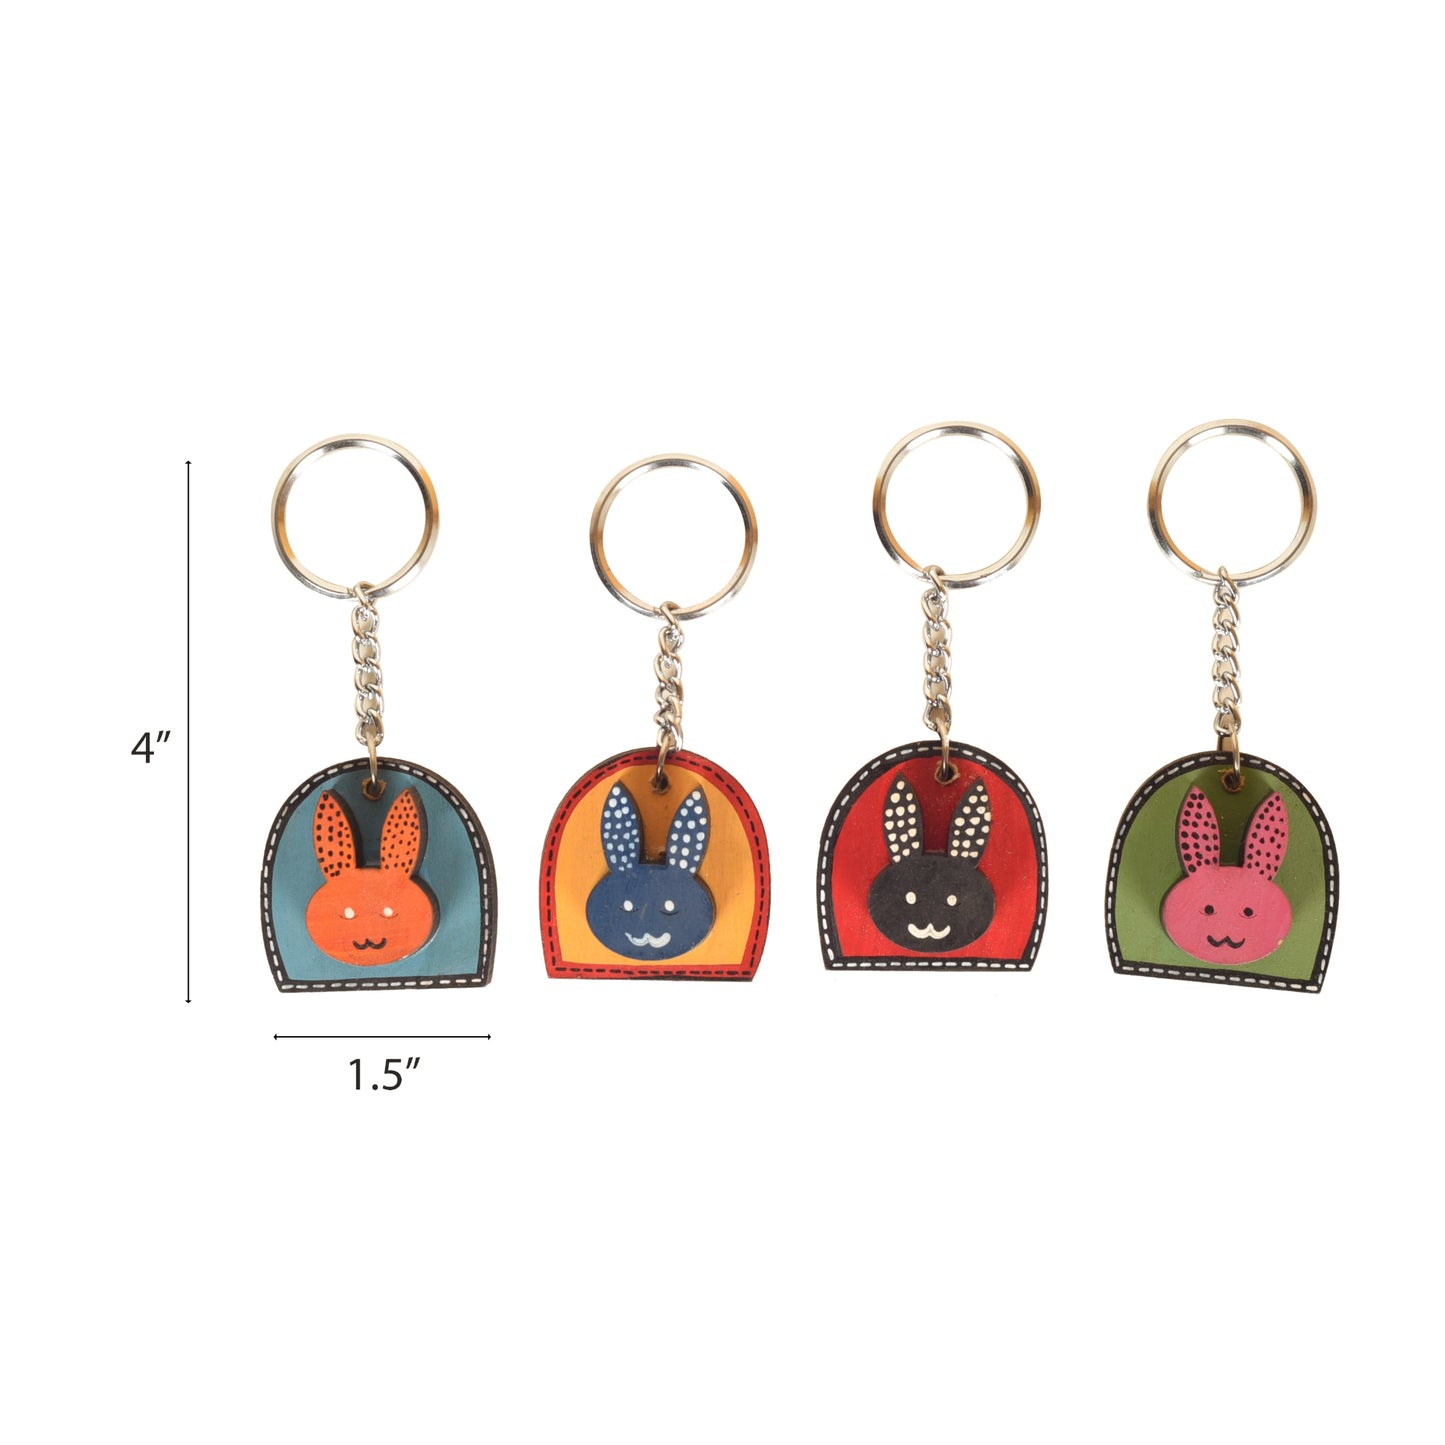 Colourful Rabbits Handcrafted Wooden Keychains (Set of 4)